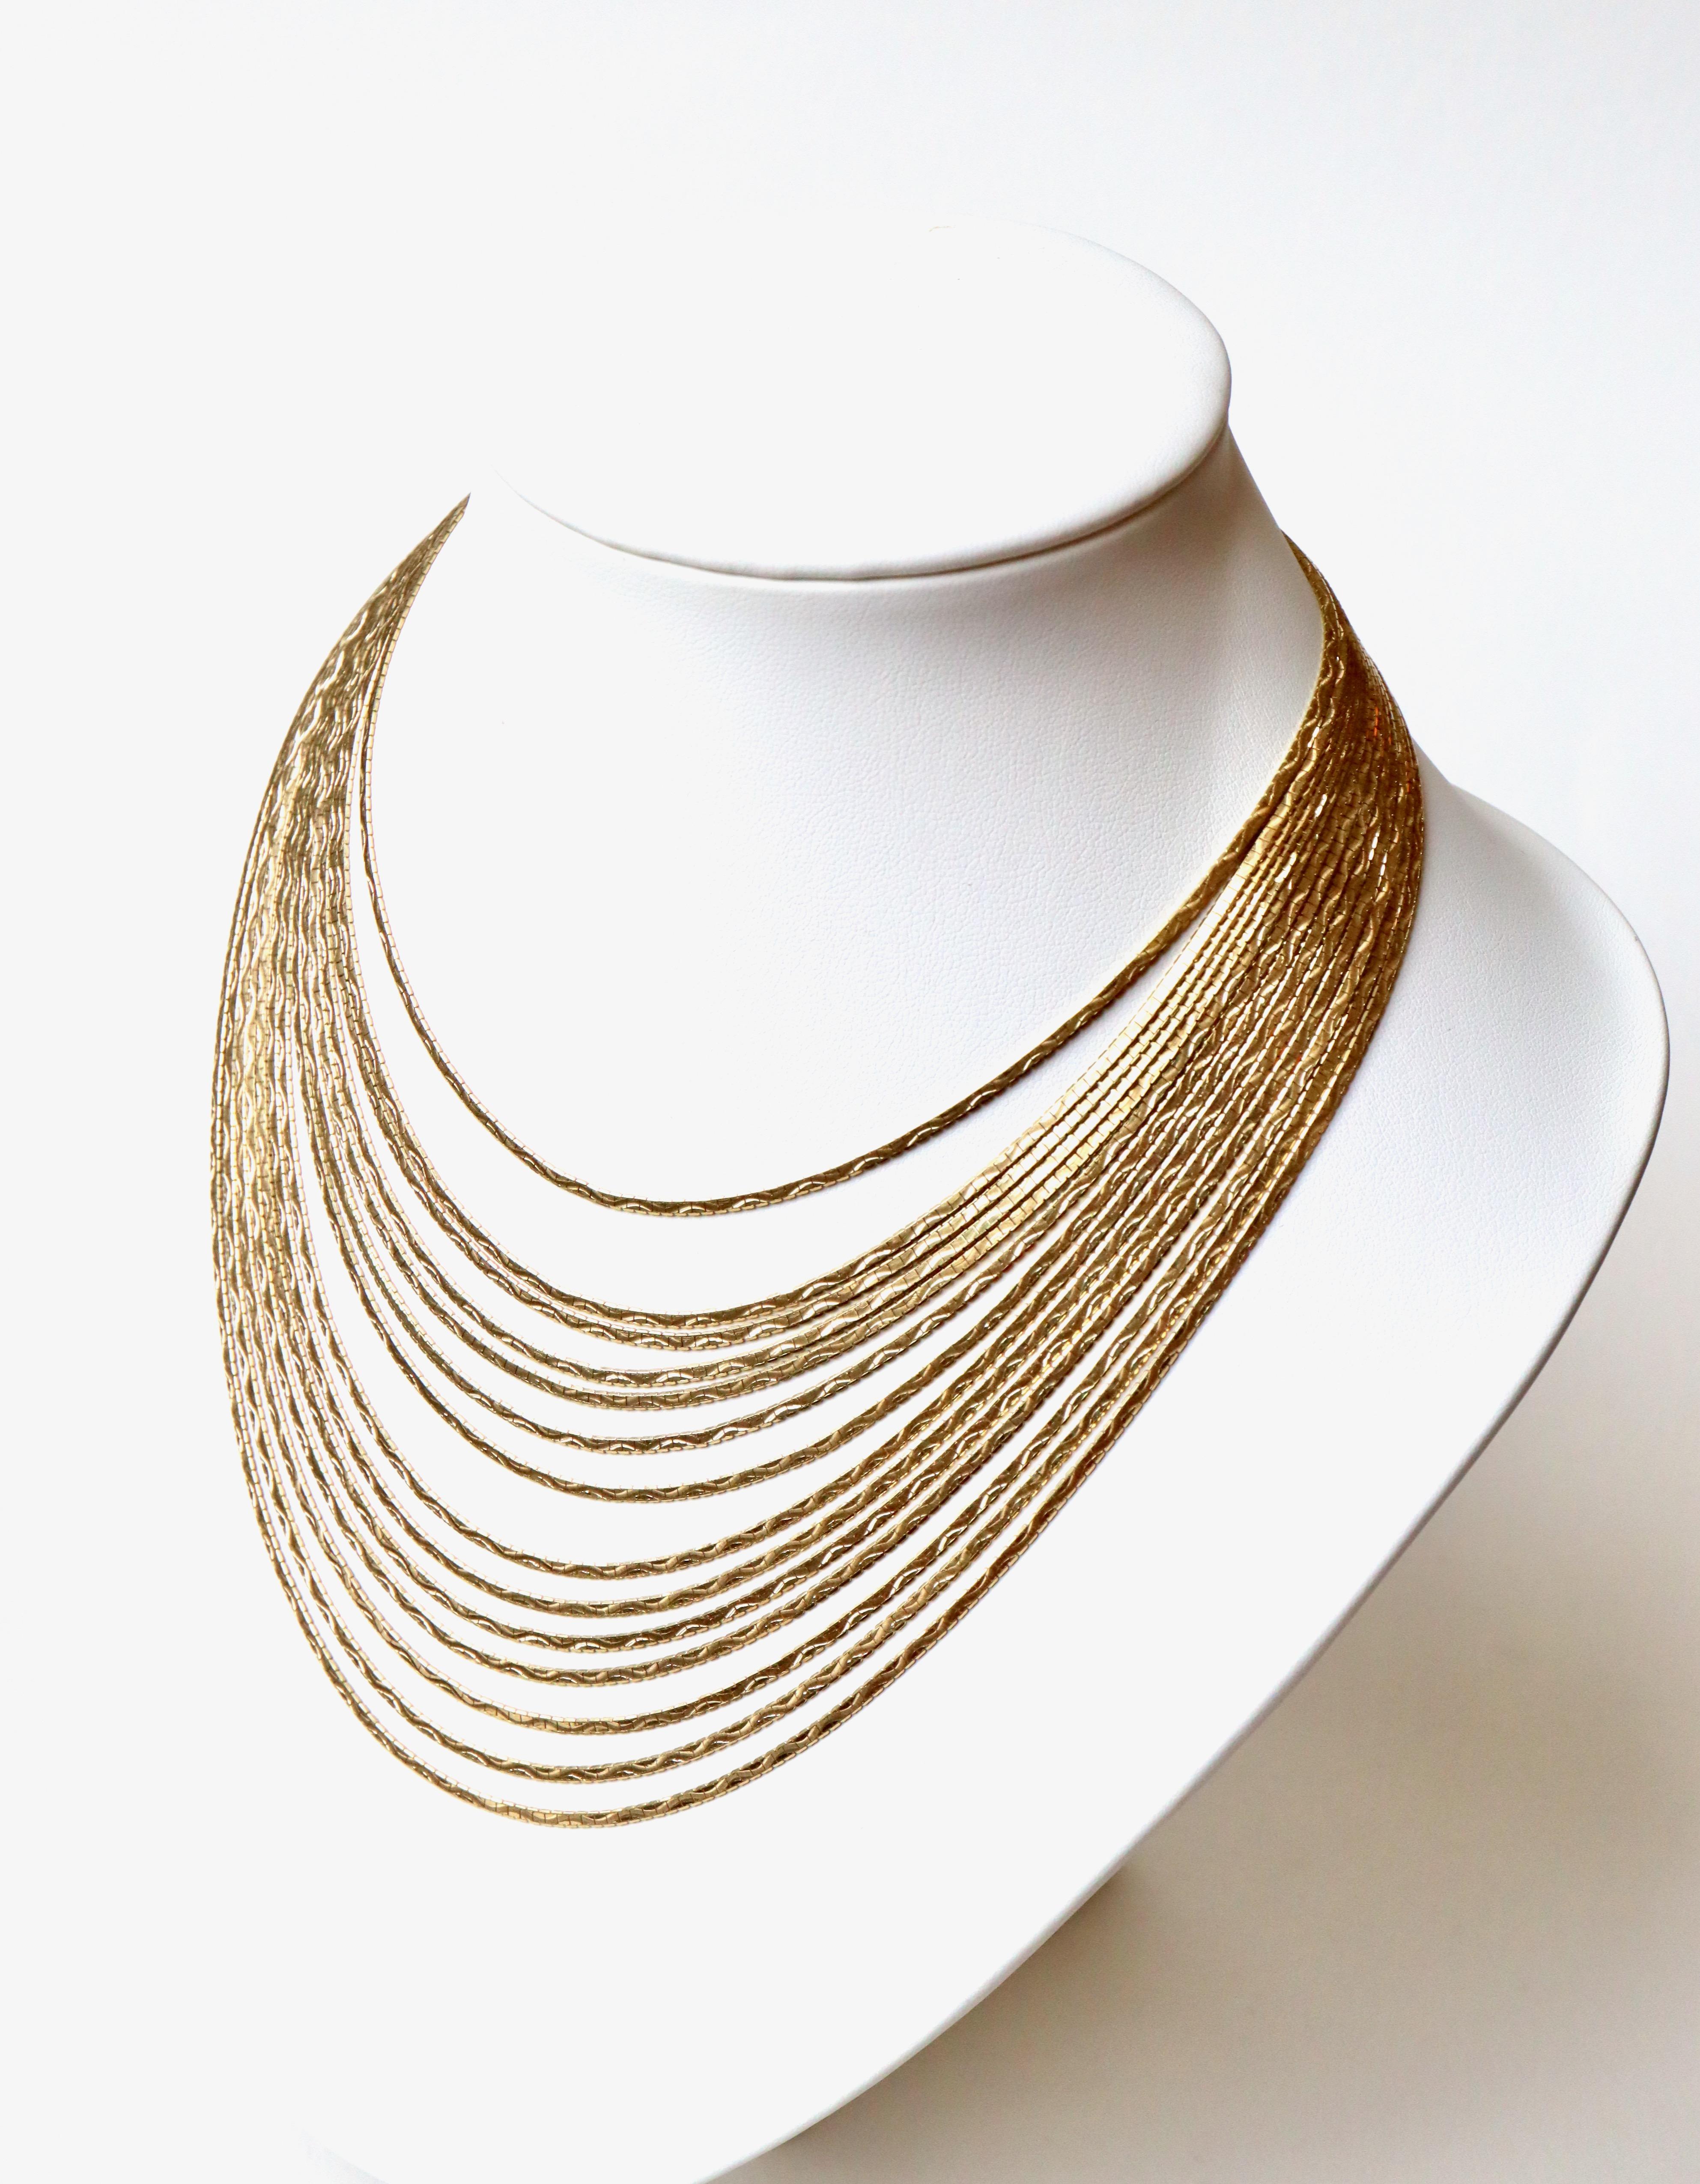 Multi-strand 18 kt yellow Gold Necklace composed of 14 Satin hinged 18 kt yellow Gold Wires. A Safety Eight. 18 Kt Gold Hallmark Eagle Head
Net weight: 101.5g
Length 37 cm at the smallest Wire and 50 cm at the largest.